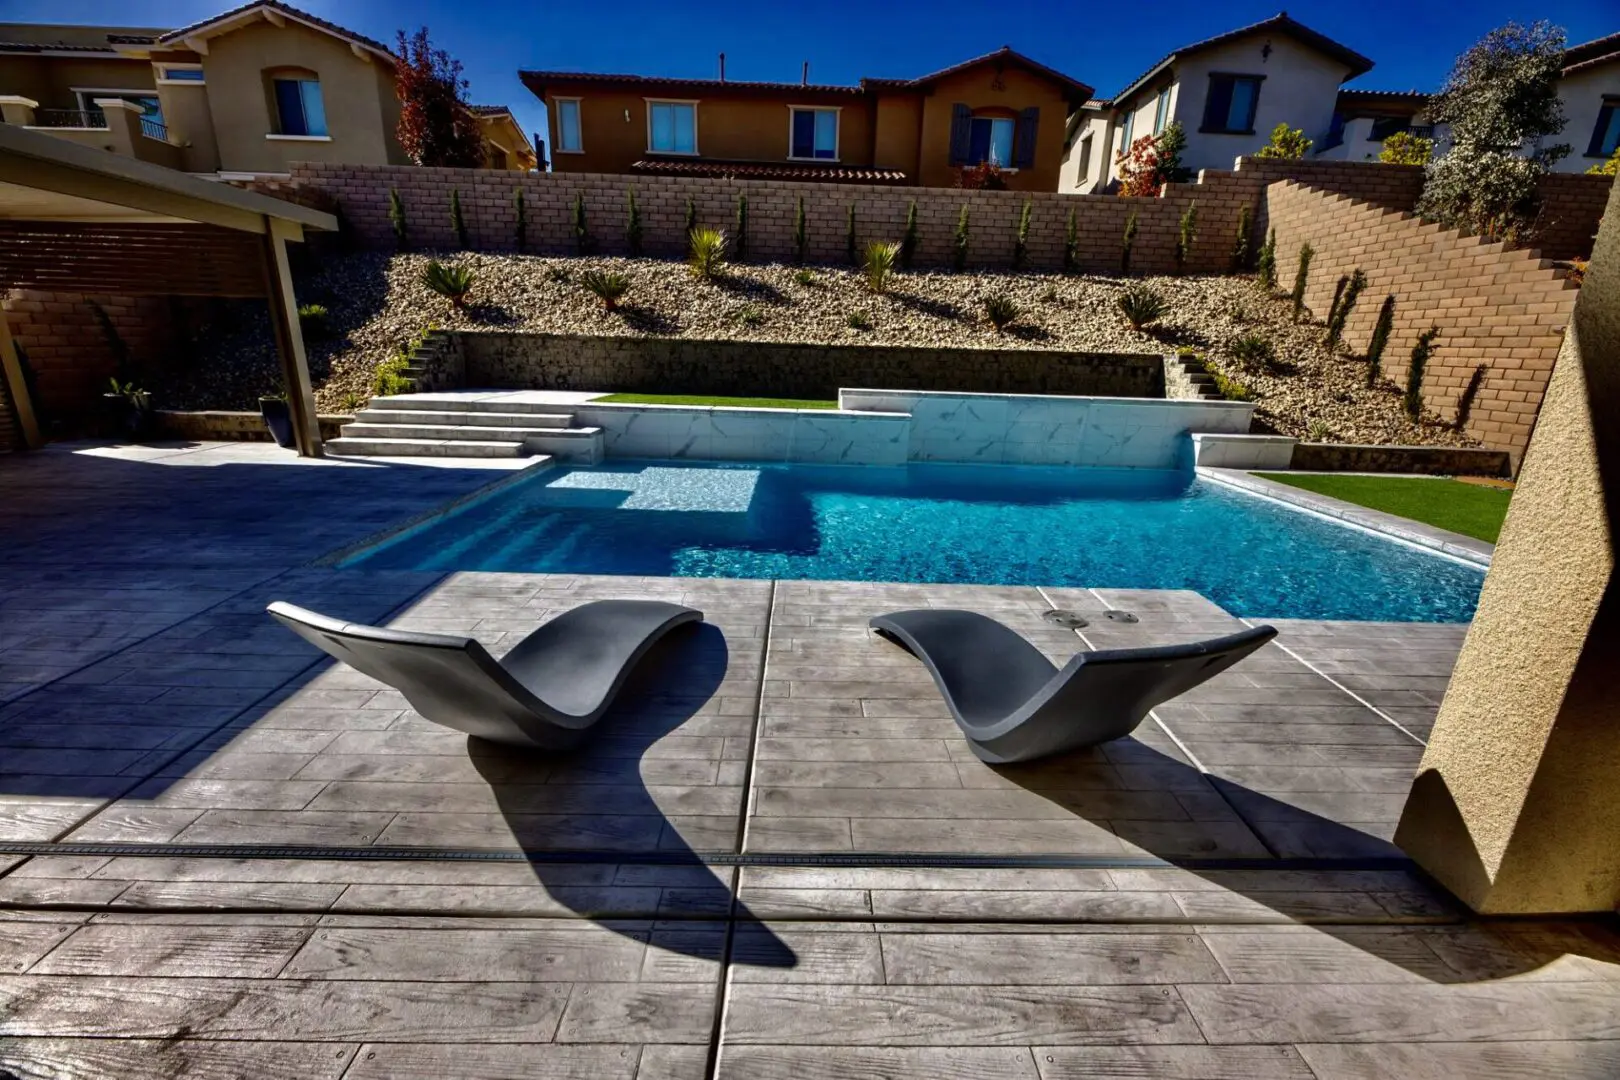 A pool with two chairs and a swimming pool.